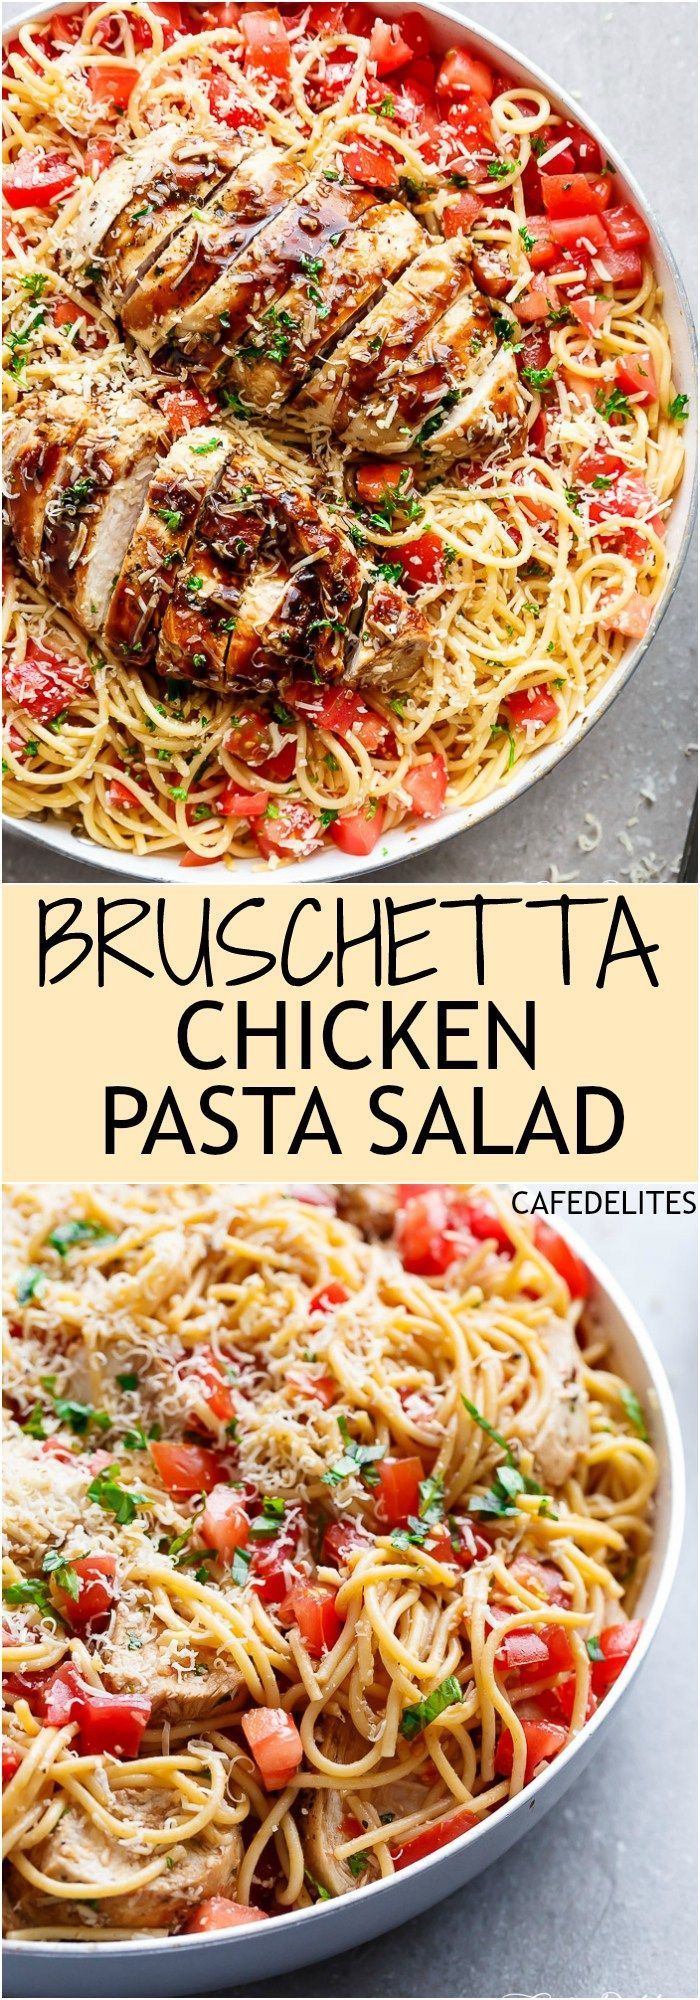 Bruschetta Chicken Pasta Salad is a must make for any occasion in minutes! Filled with Italian seasoned grilled chicken, garlic